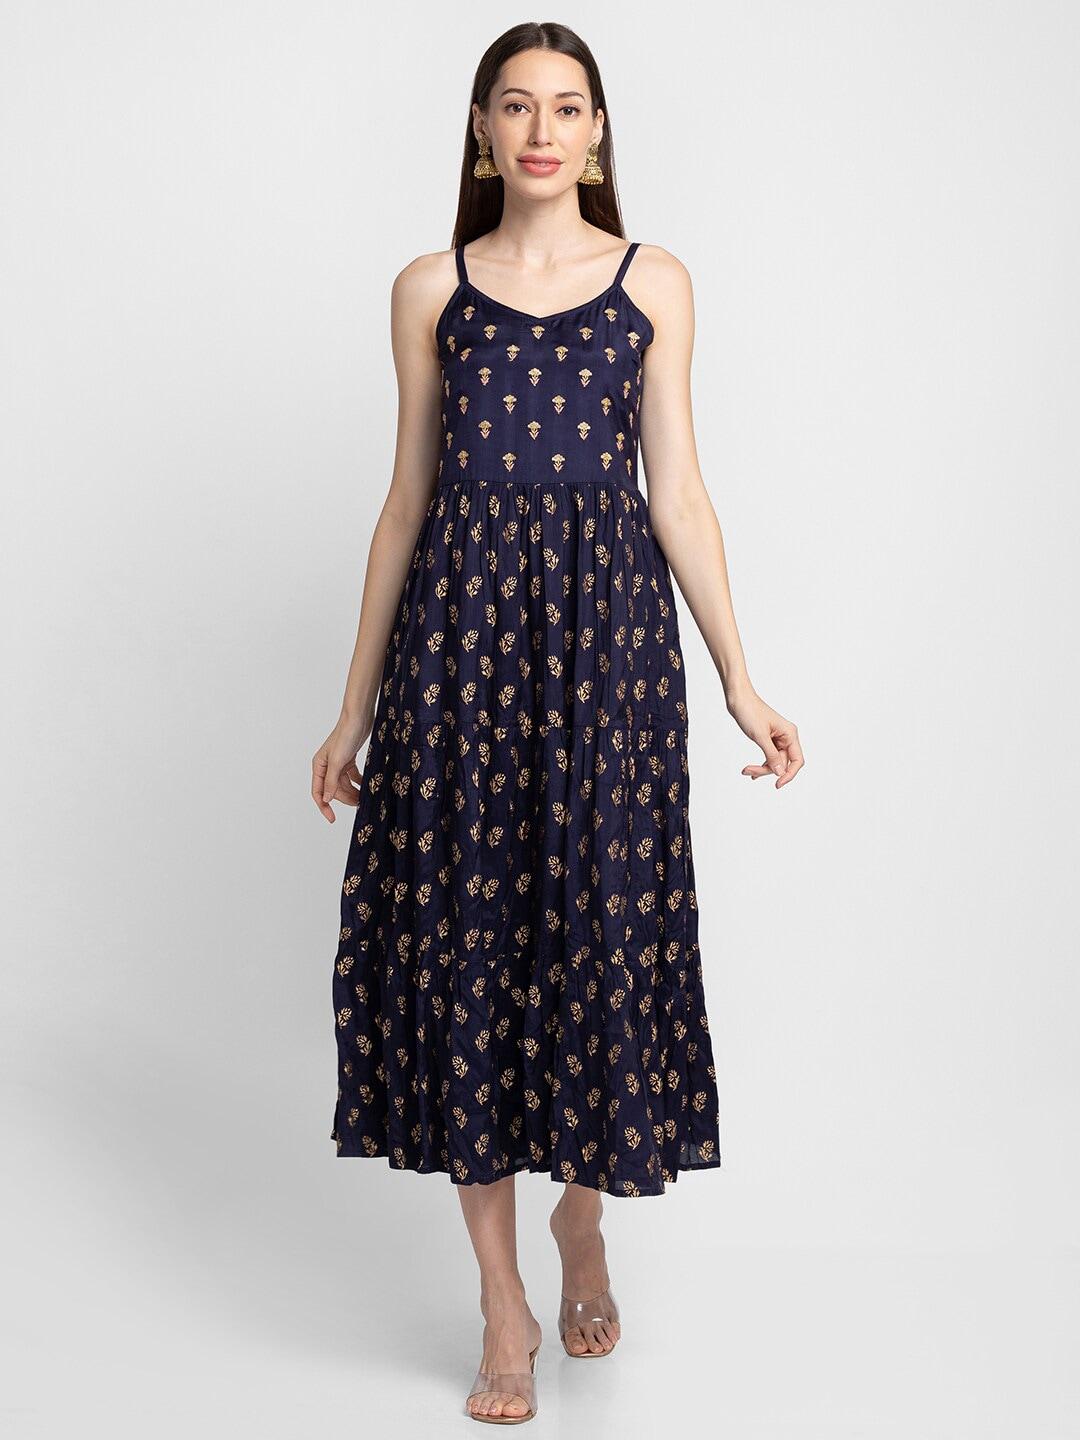 globus-navy-blue-floral-embroidered-ethnic-midi-dress